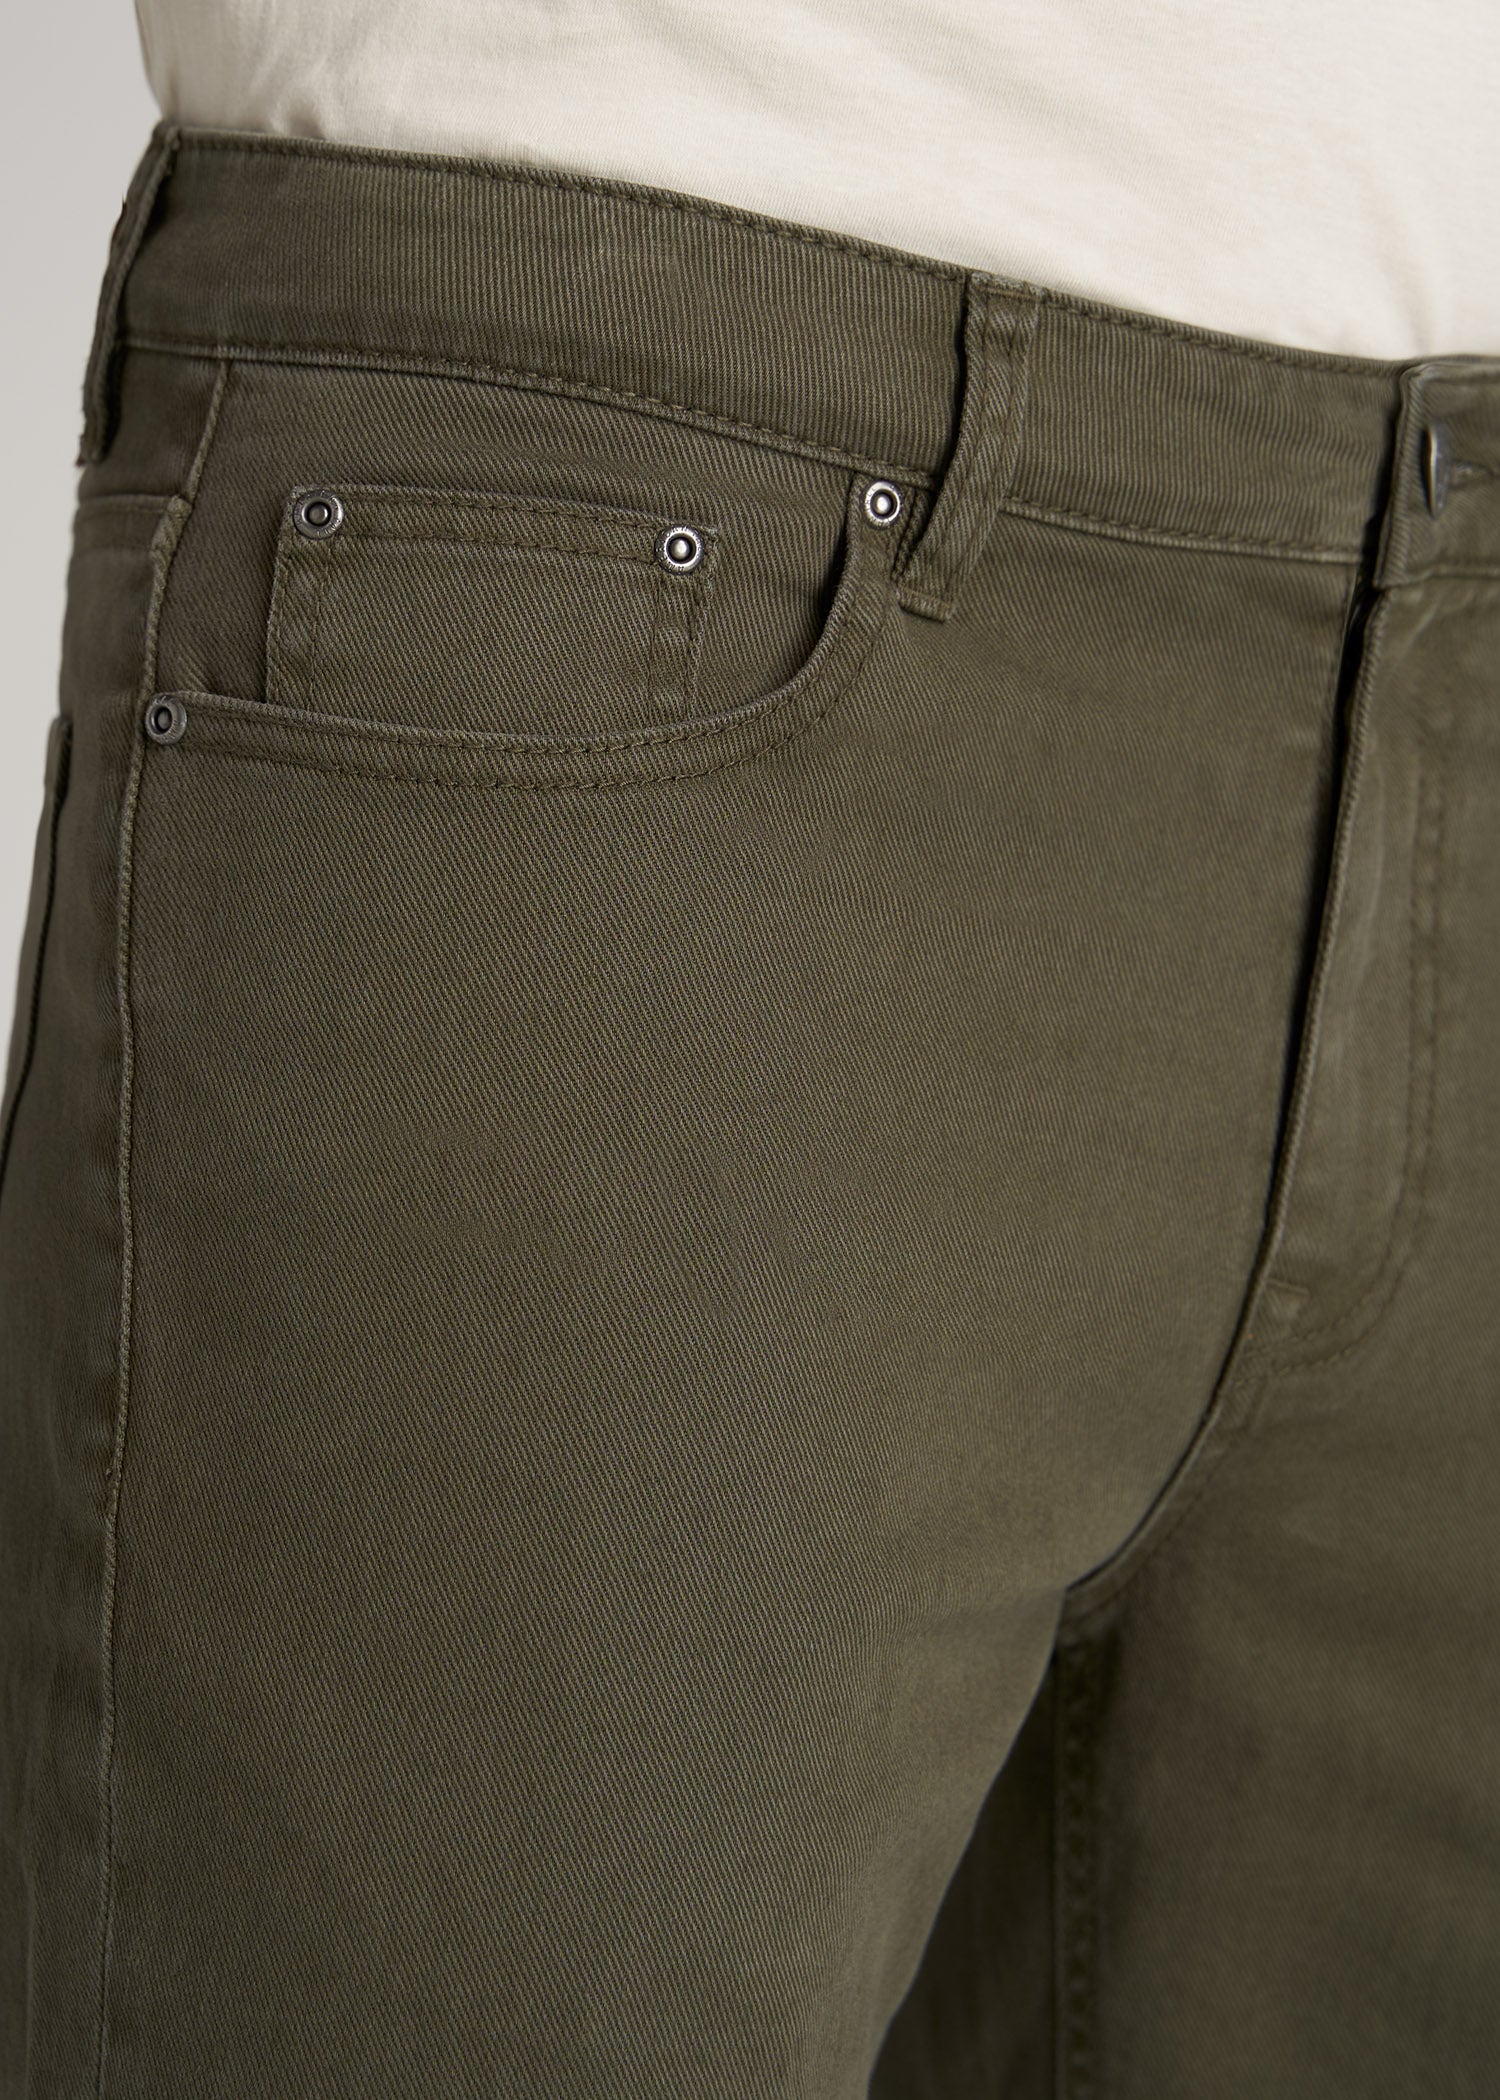 Dylan Slim Fit Jeans Olive Green Wash For Tall Men | American Tall